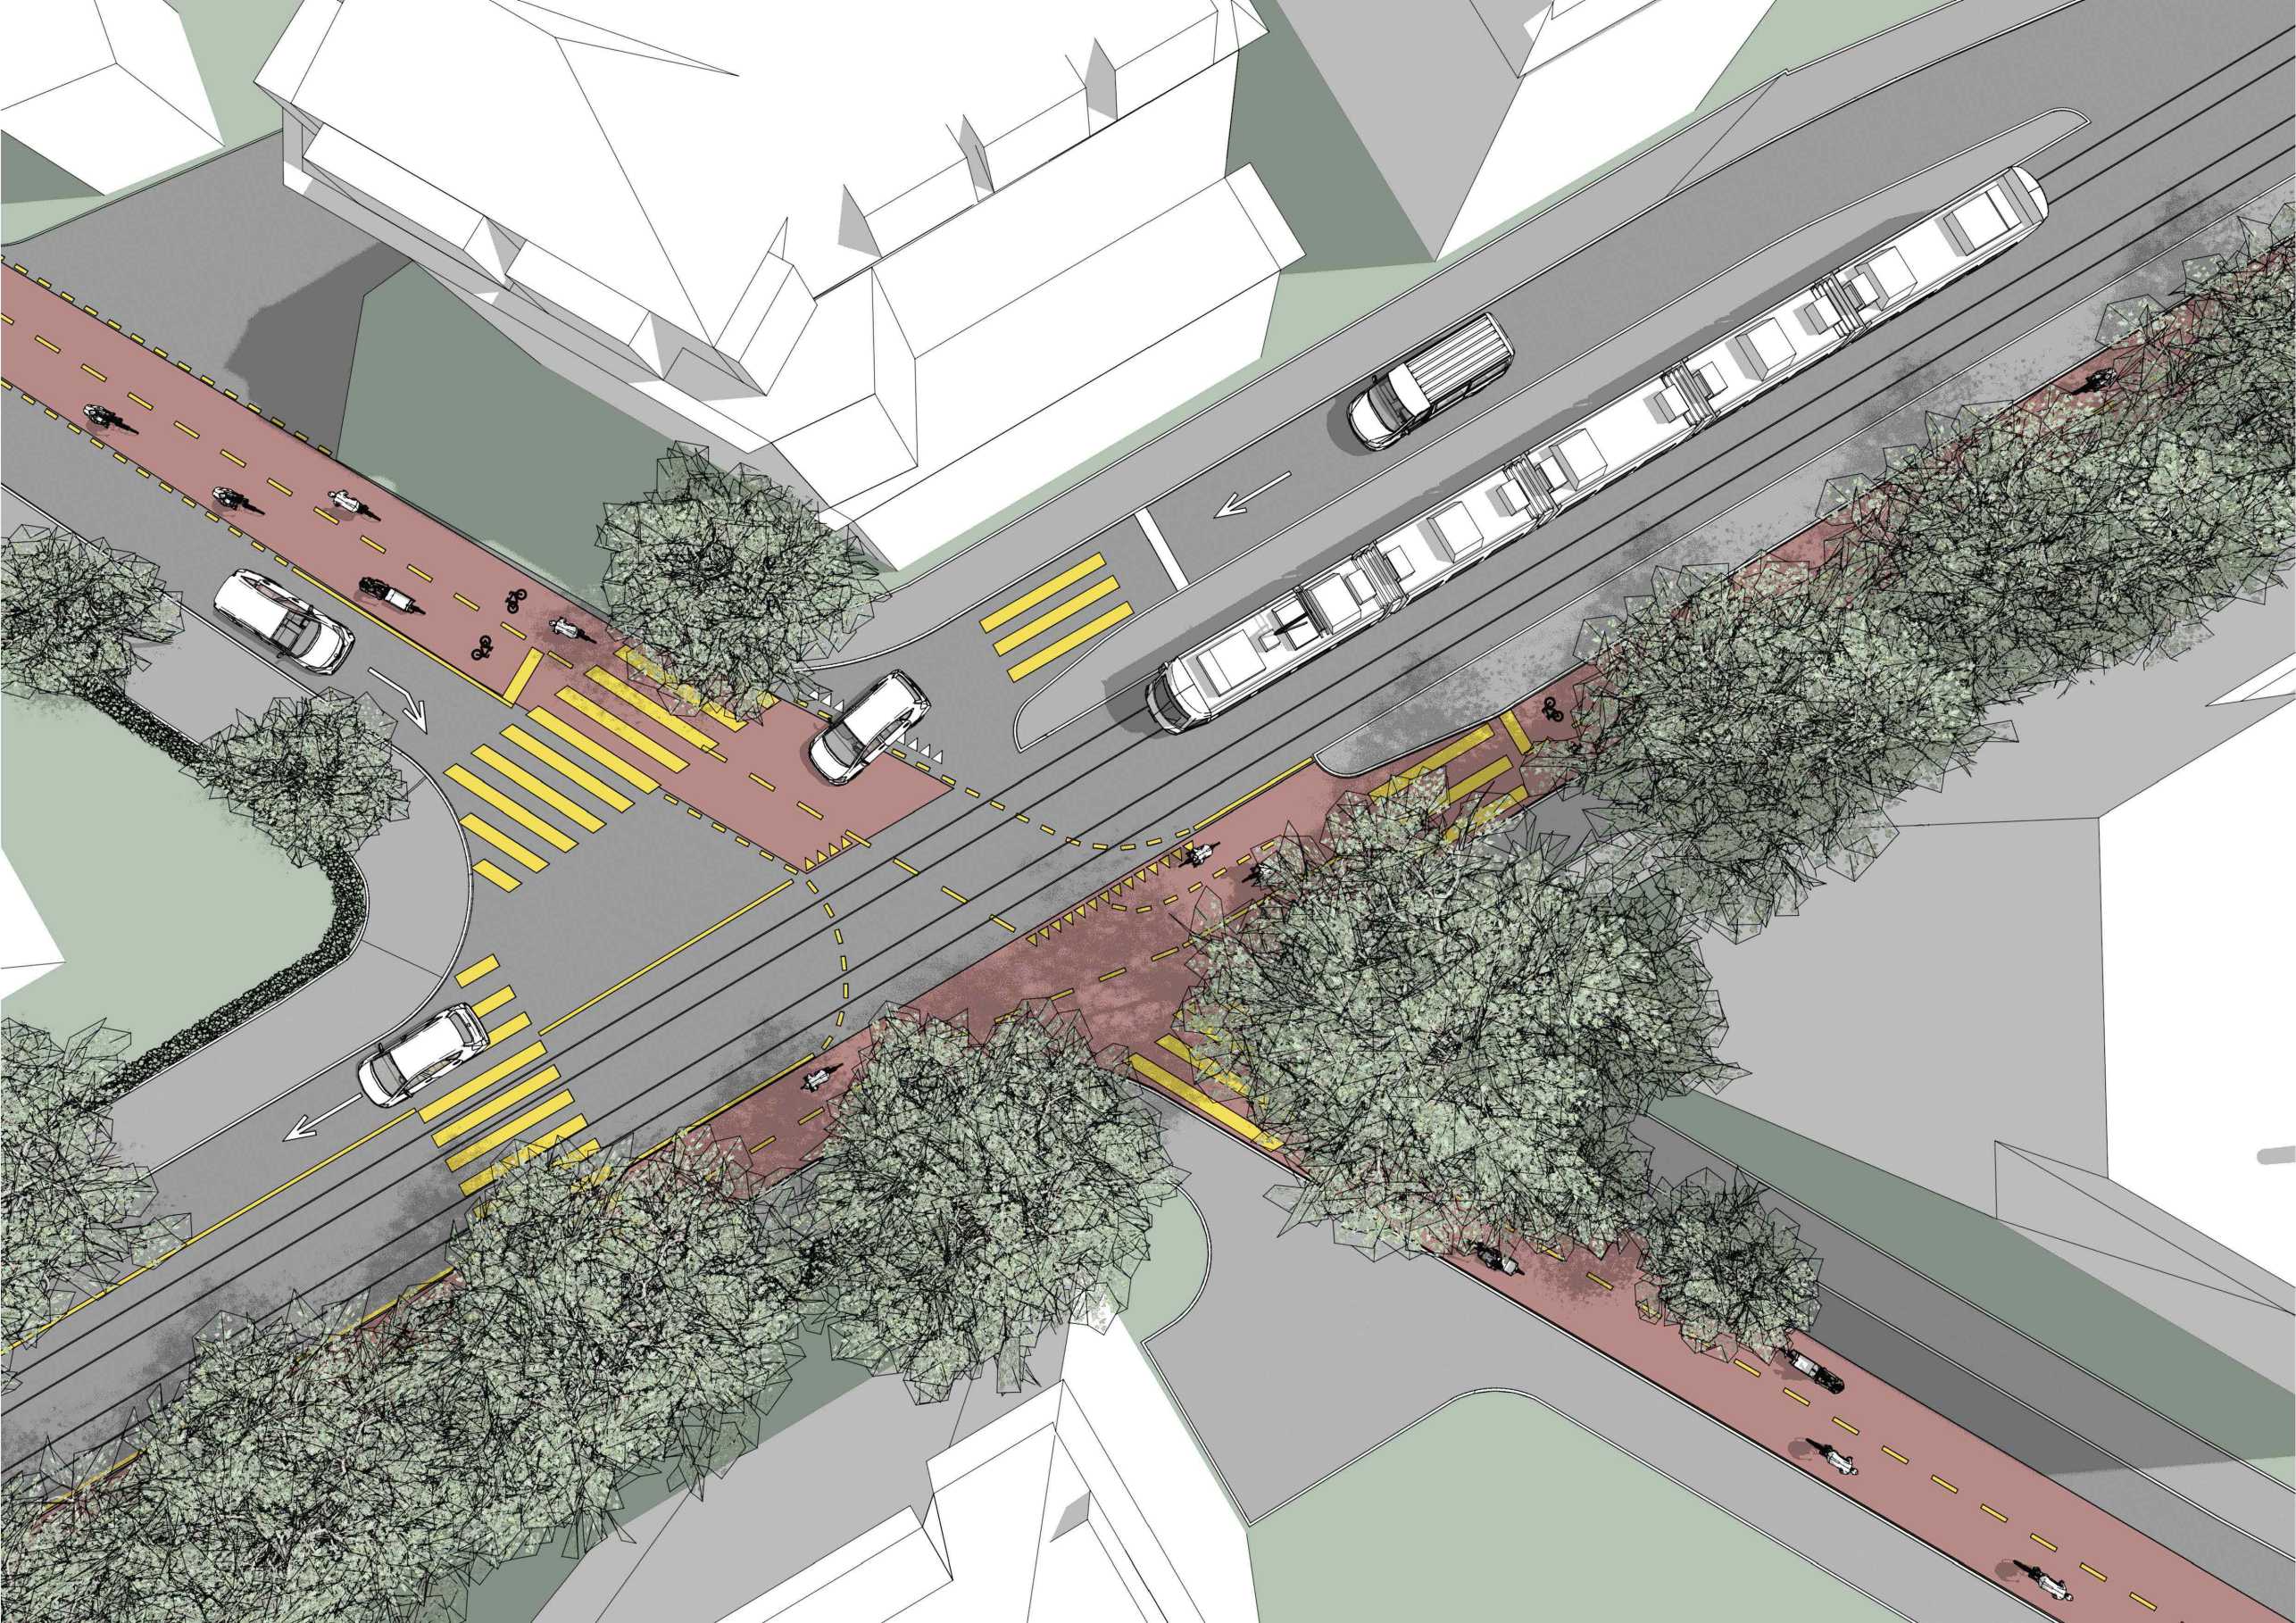 Enlarged view: Illustration of an optimised intersection for e-bikes from a bird's eye view.